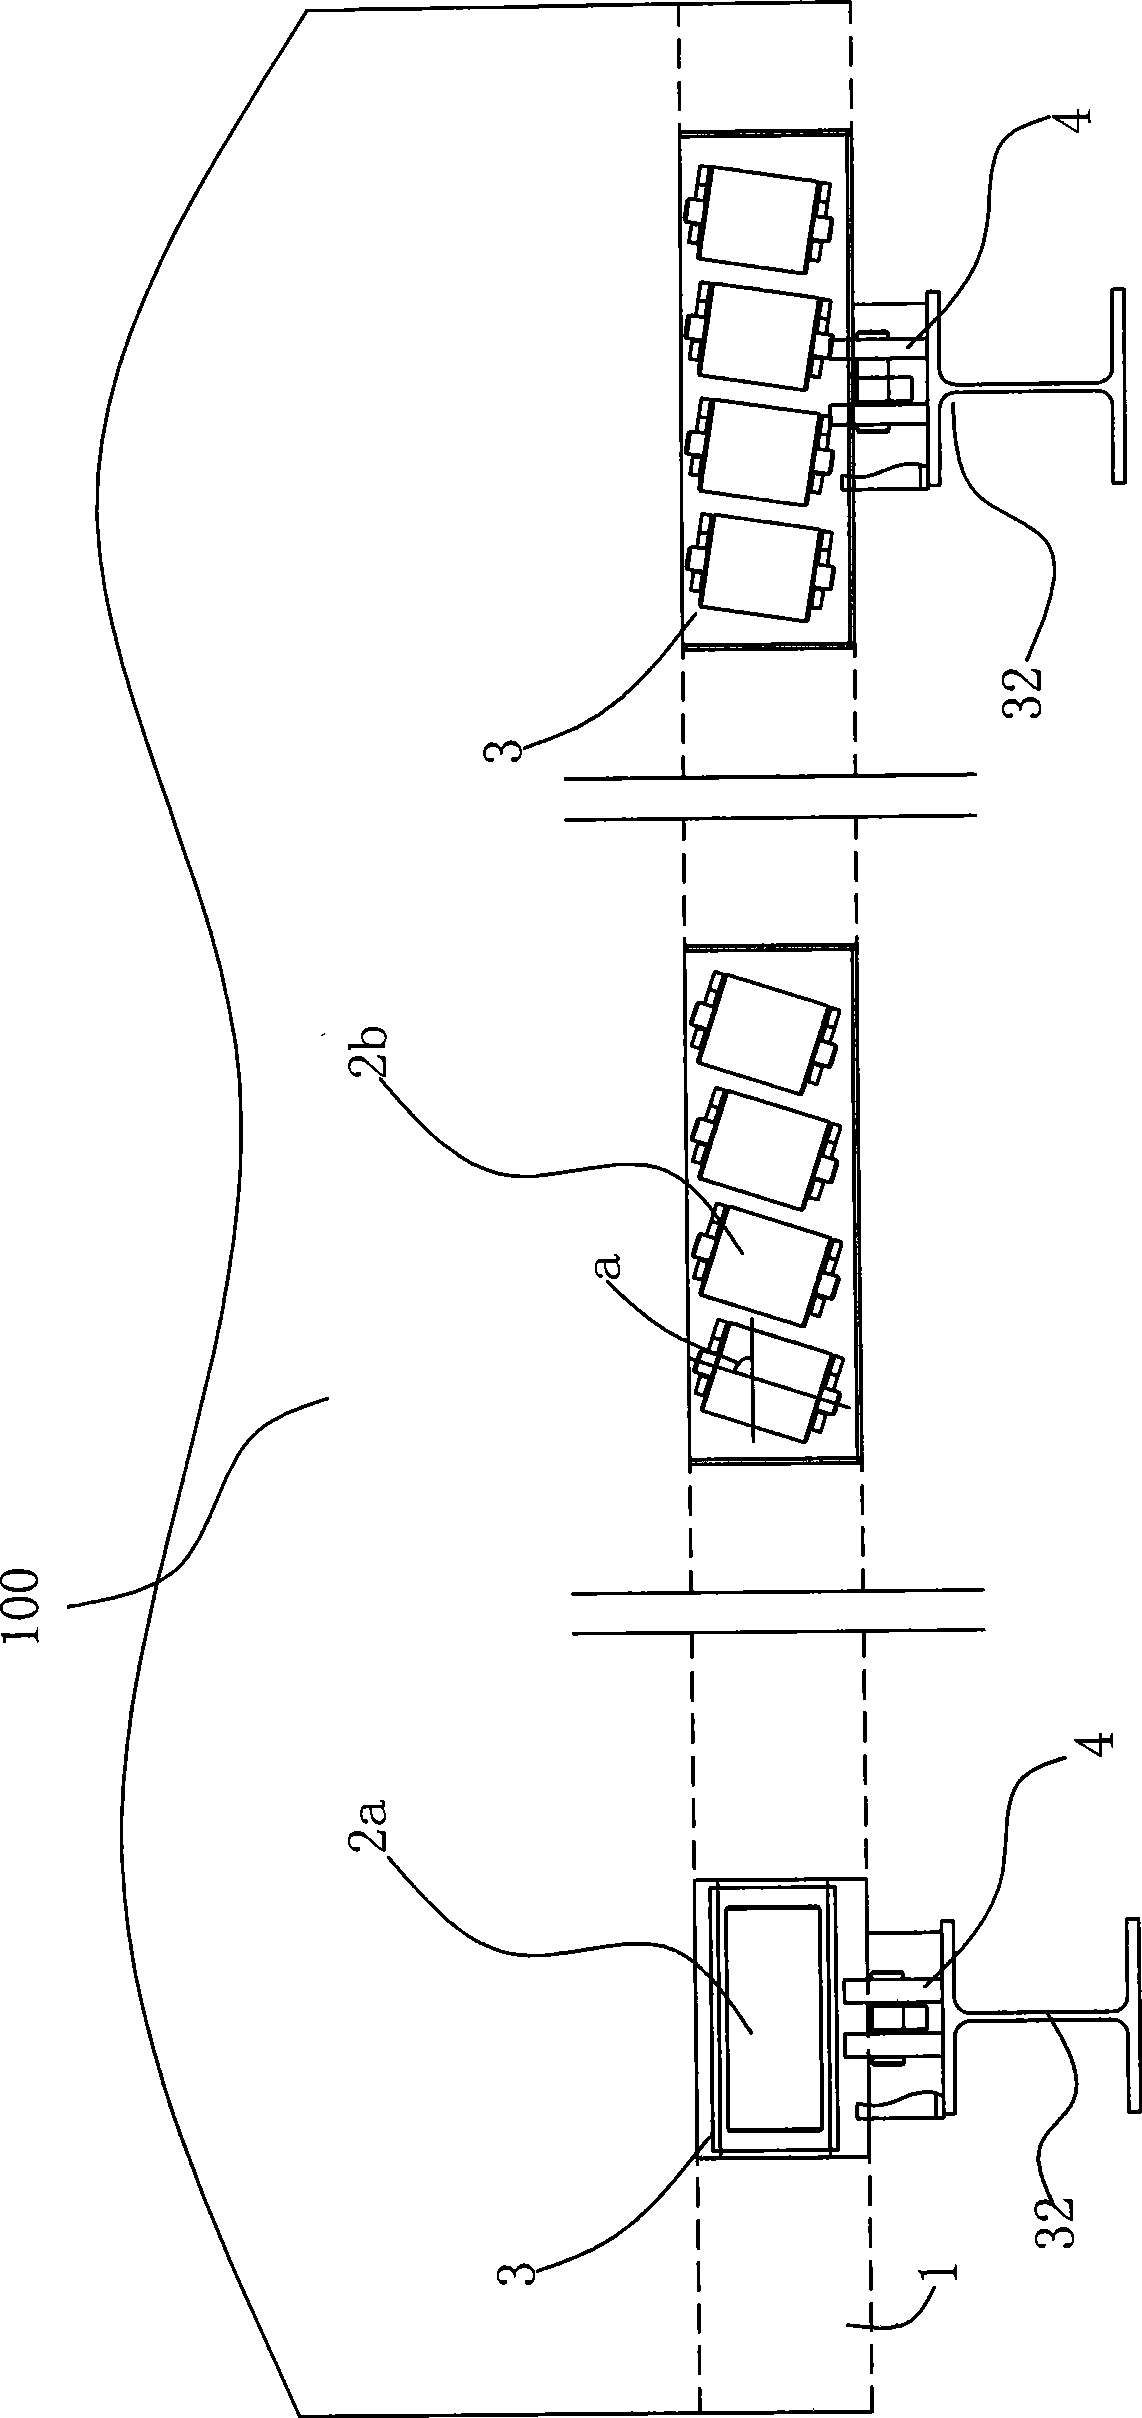 Supporting device for supporting waste heat boiler